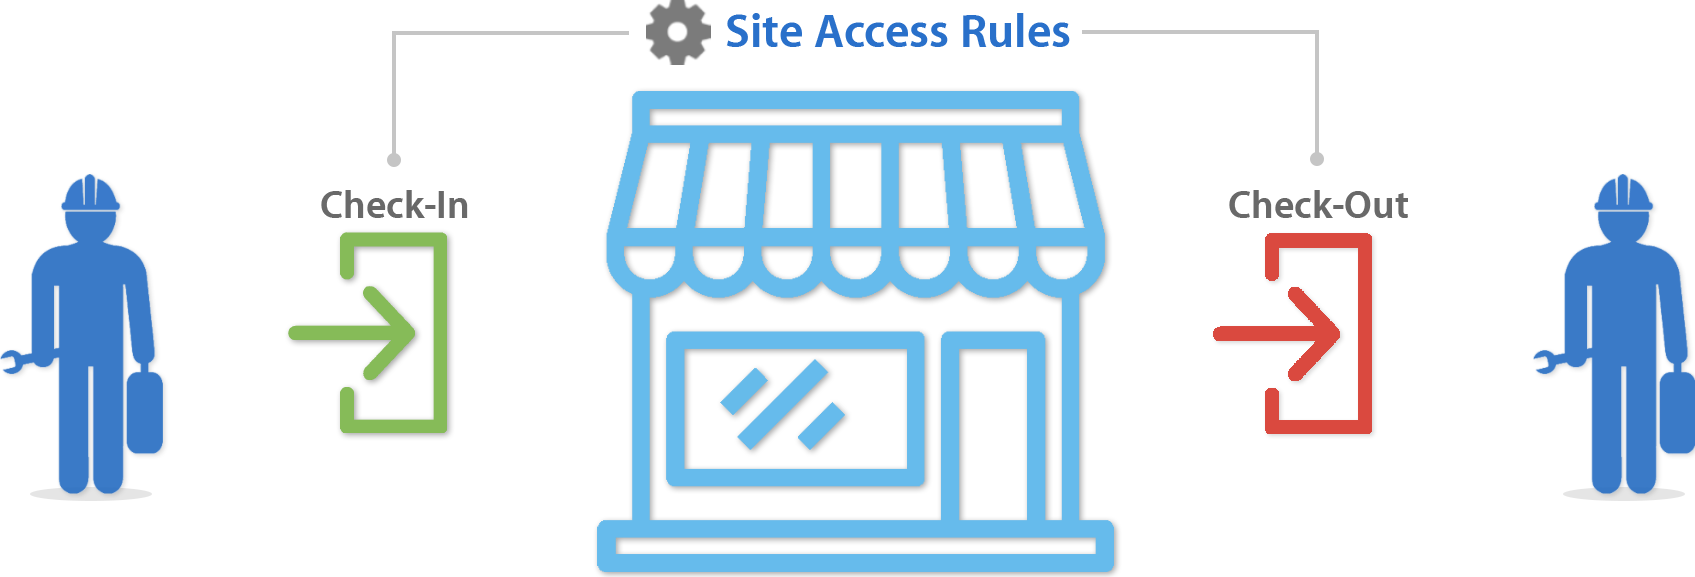 Site Access rules for the check-in and check-out flows